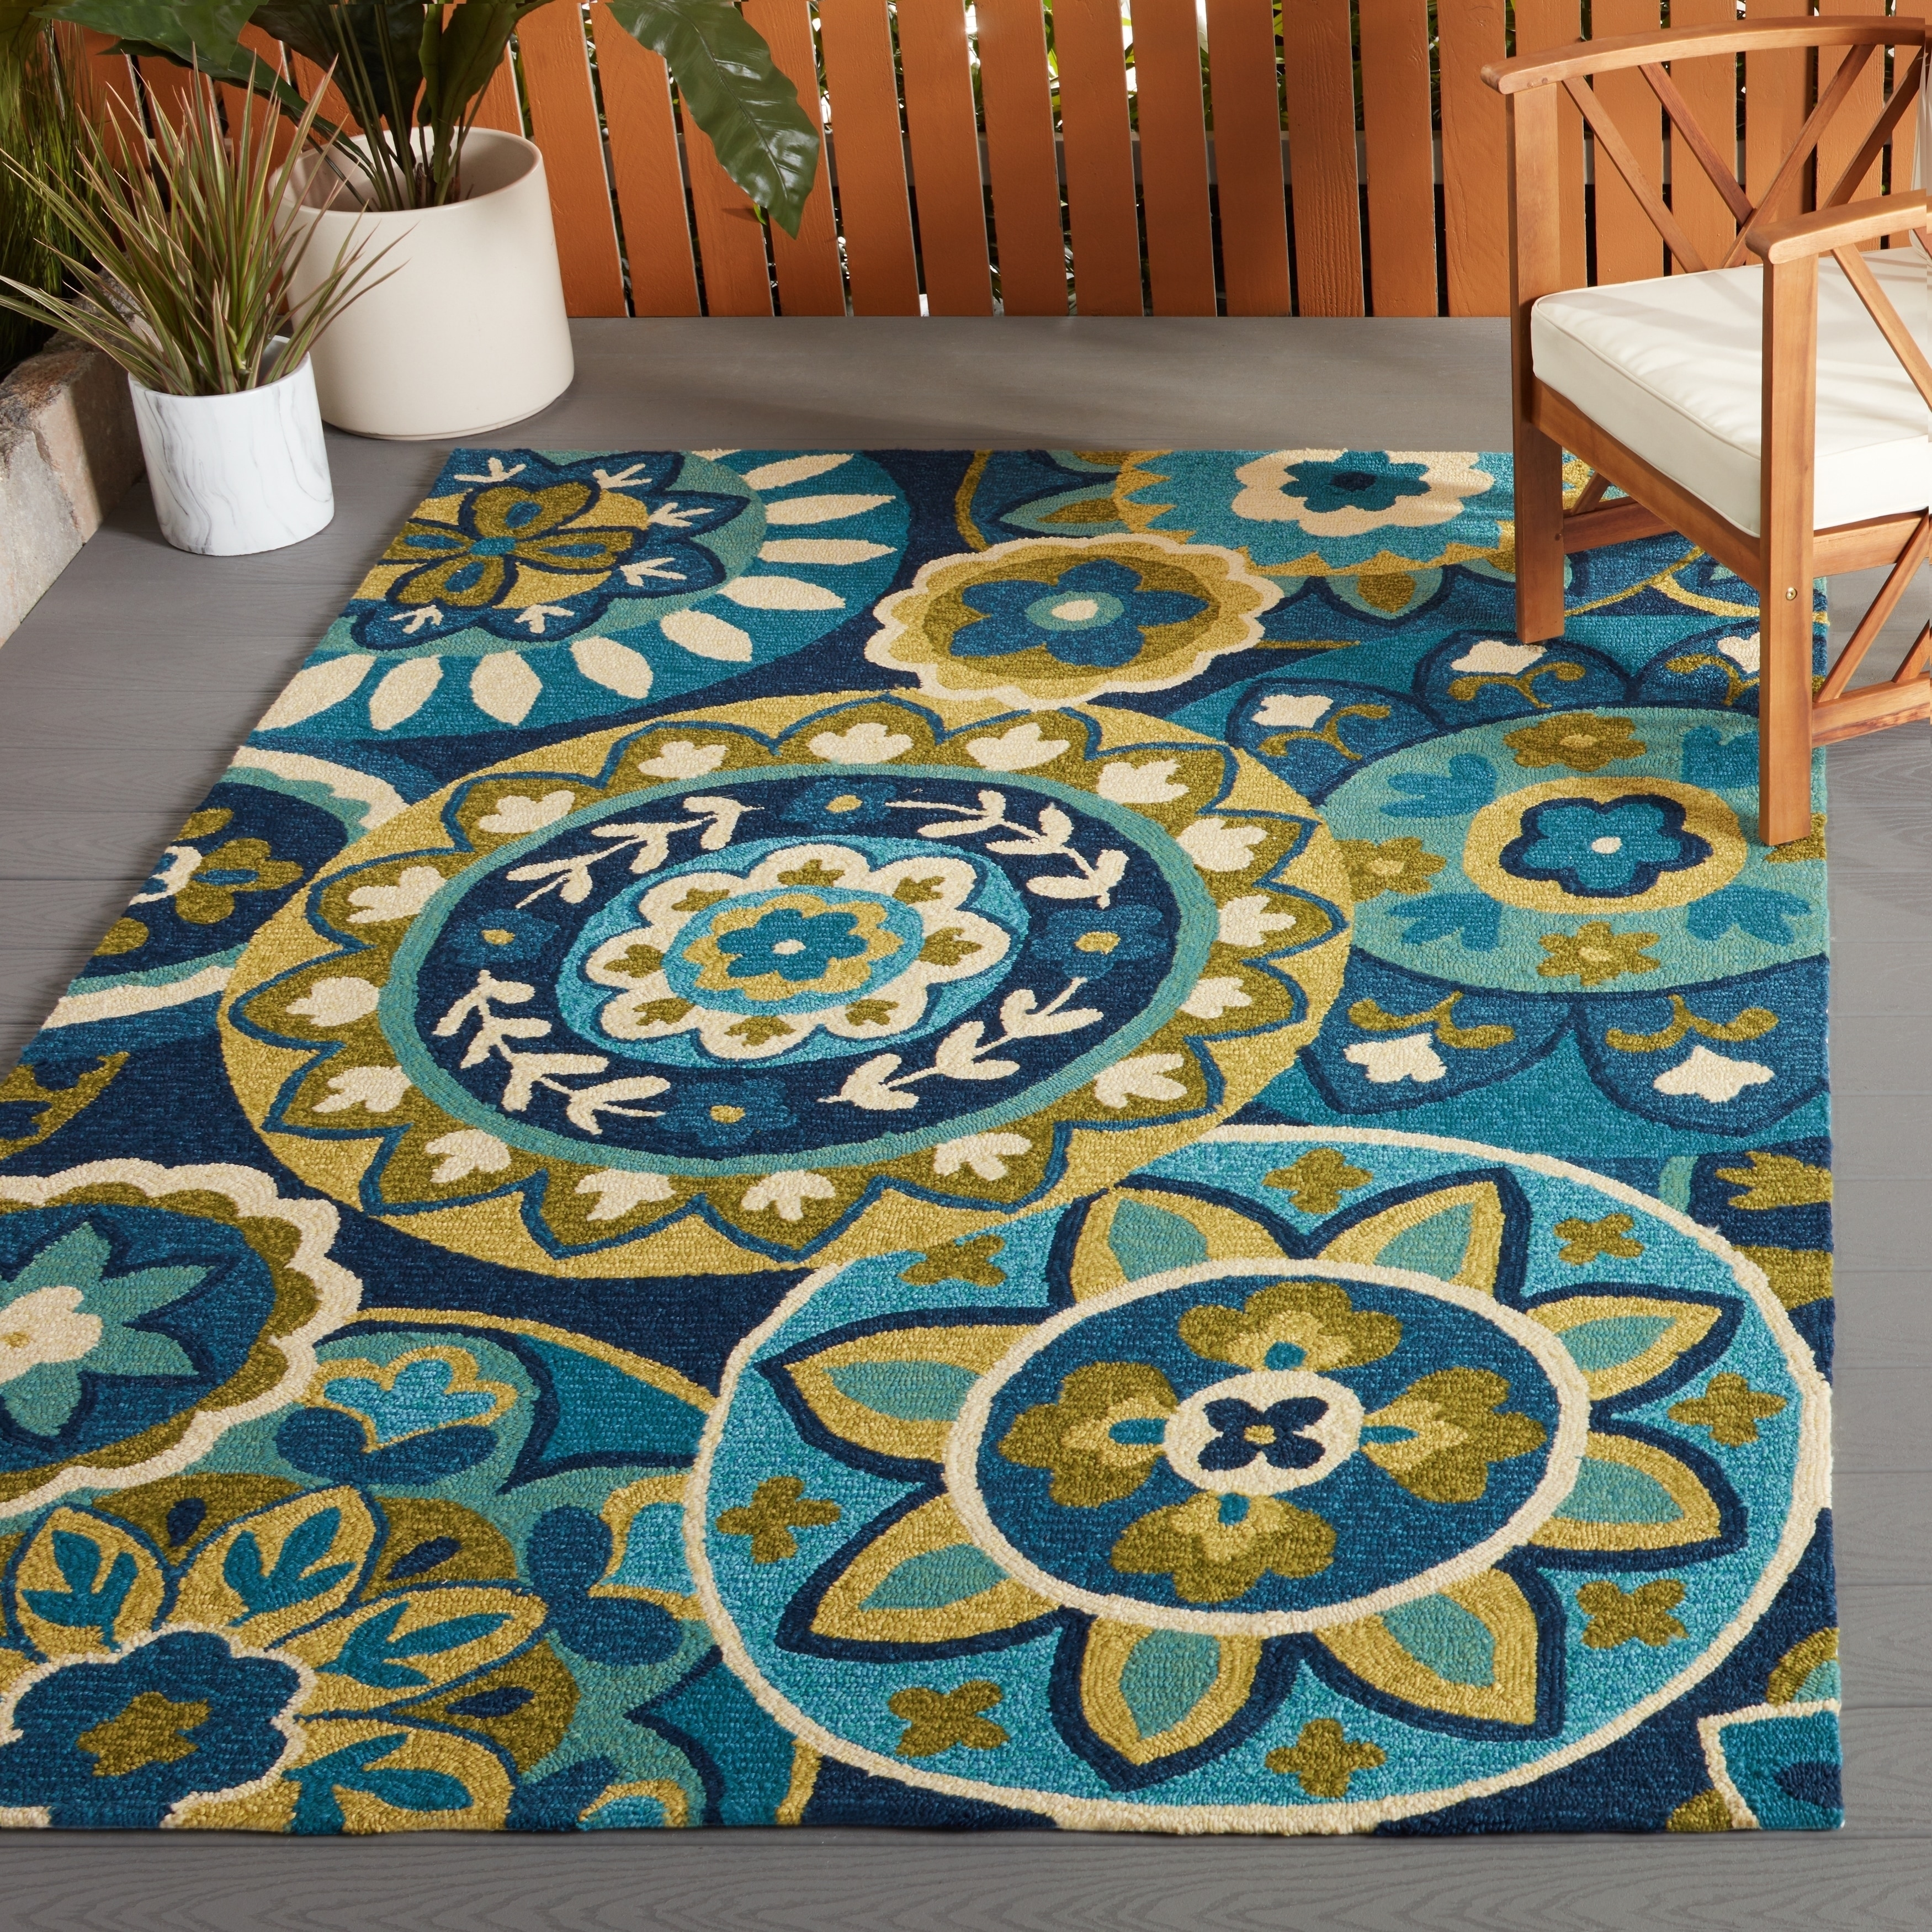 https://ak1.ostkcdn.com/images/products/is/images/direct/5bb53bbcd443c5e646e39d1074bb462ef84e30ac/Miami-Sundial-Teal-Green-Indoor--Outdoor-Area-Rug.jpg